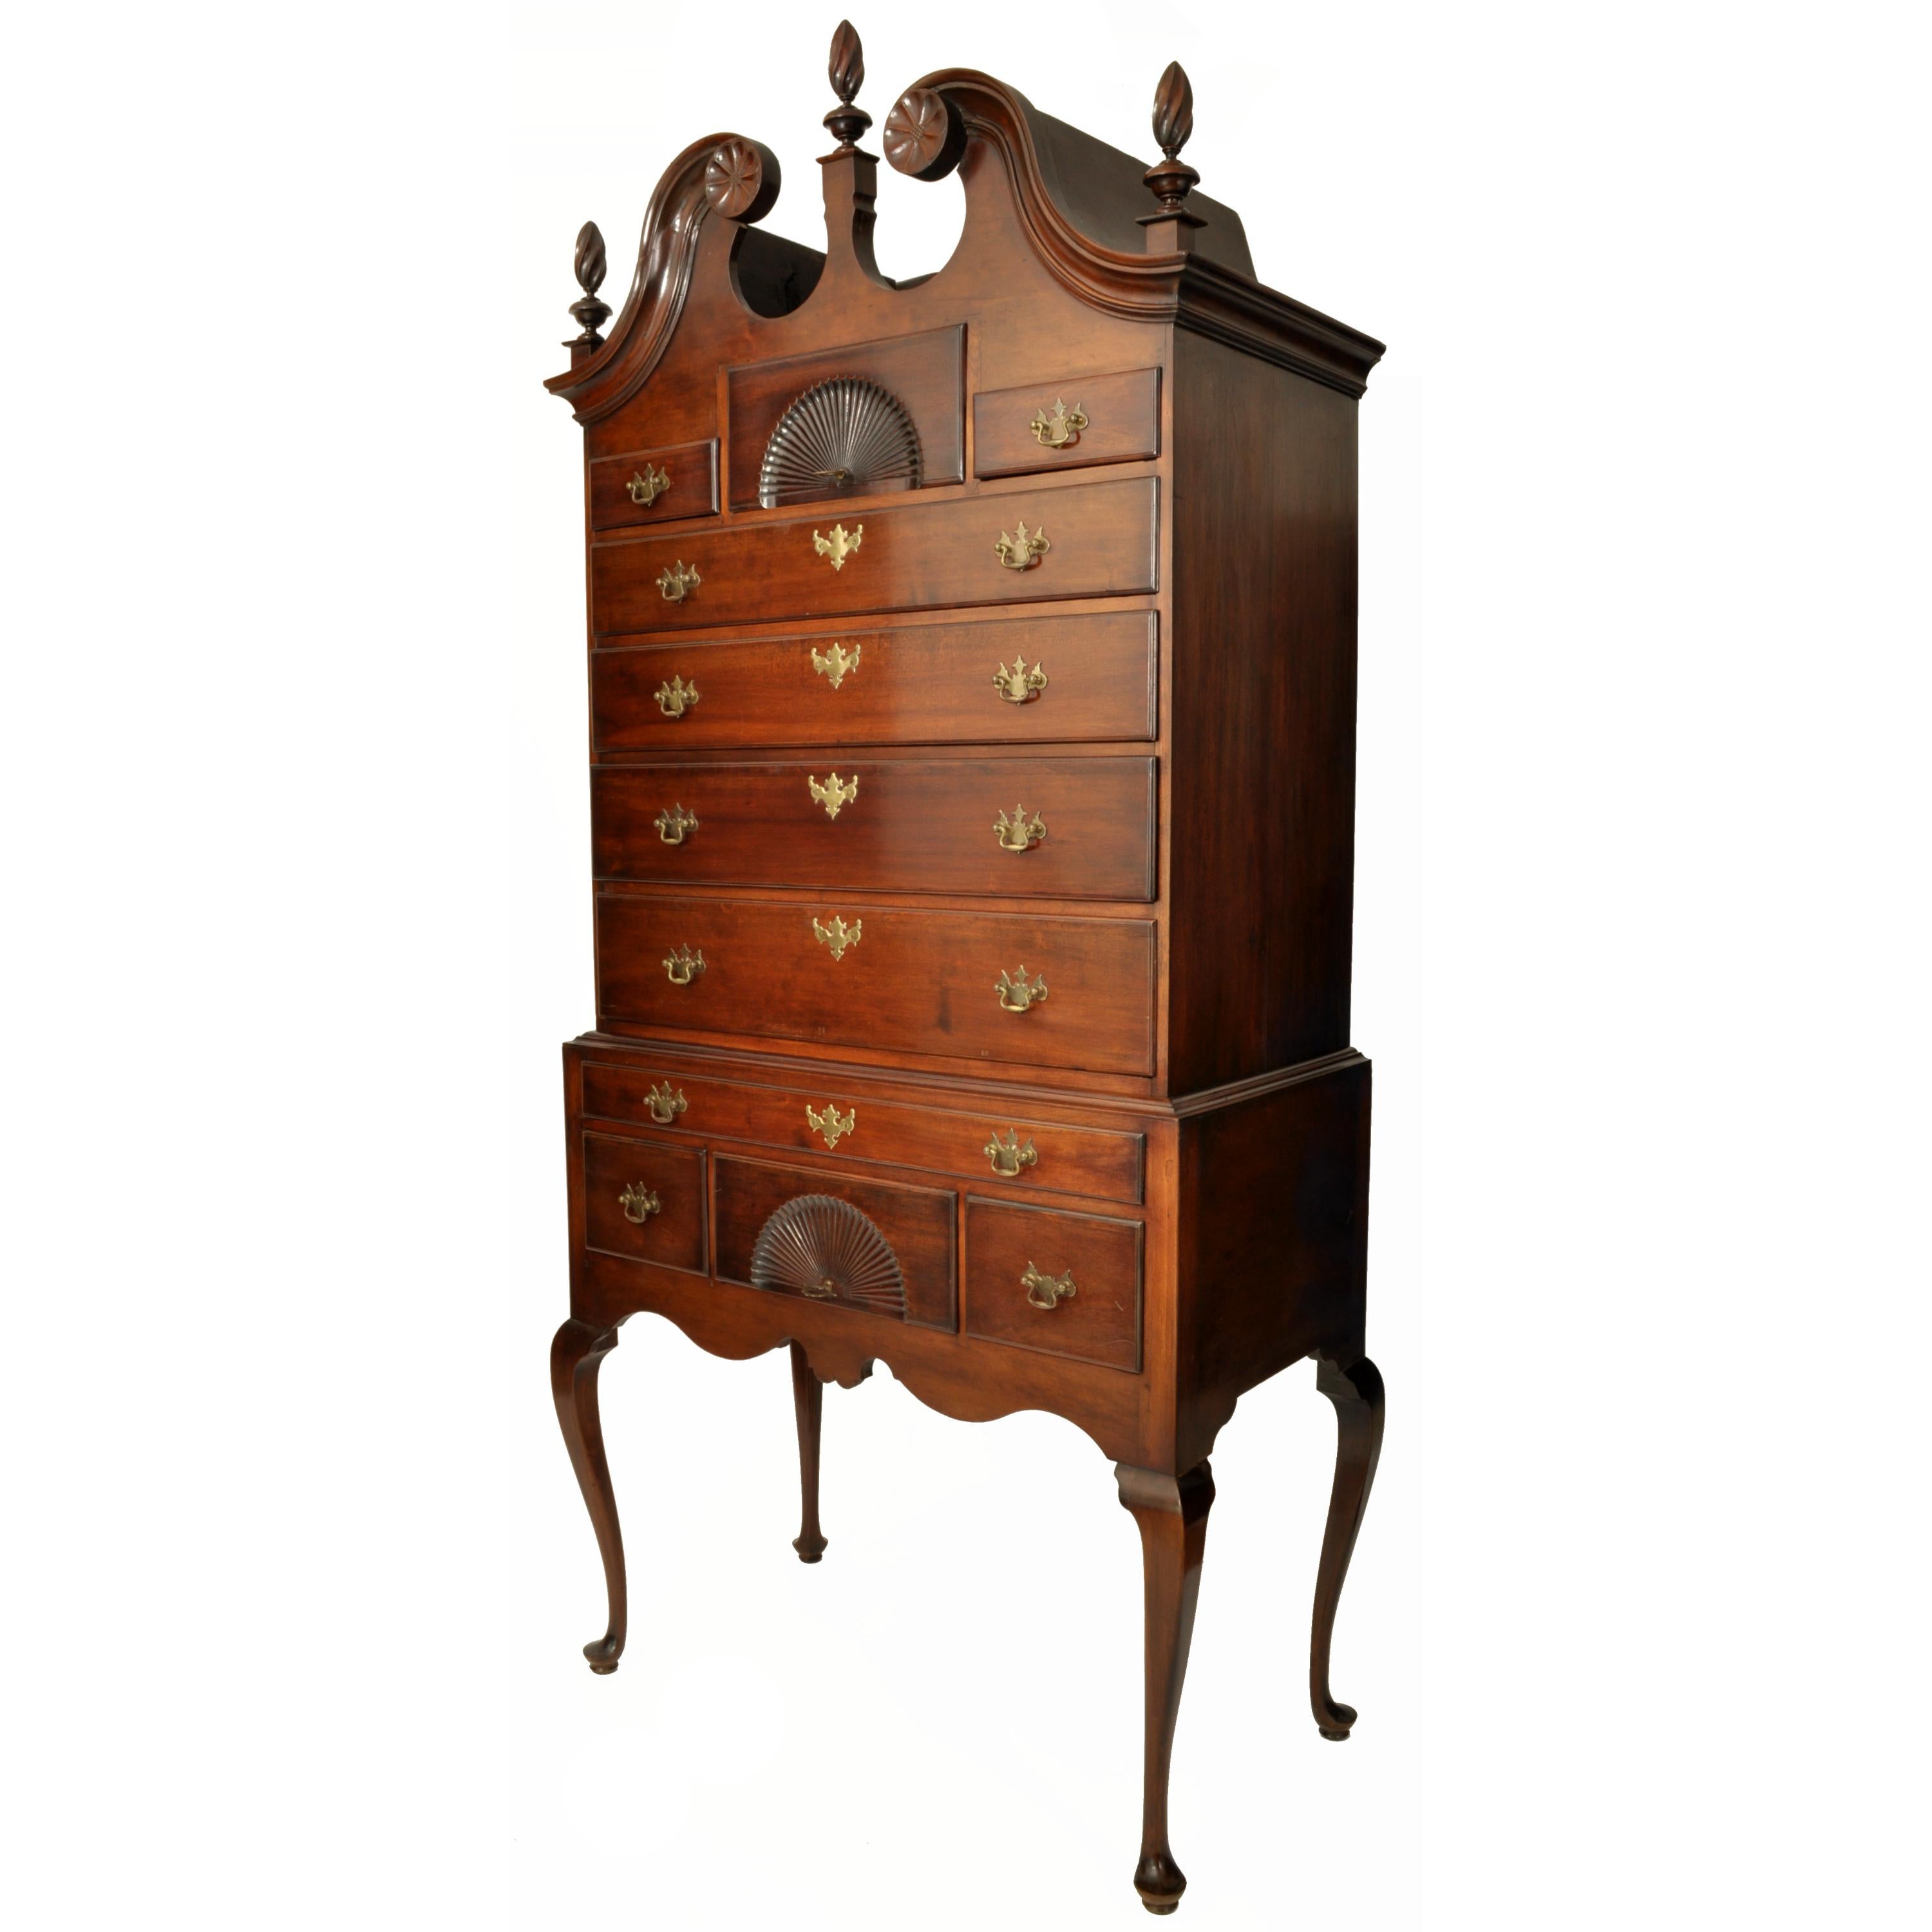 Chippendale Antique American 18th Century Mahogany Highboy Chest on Stand Massachusetts 1760